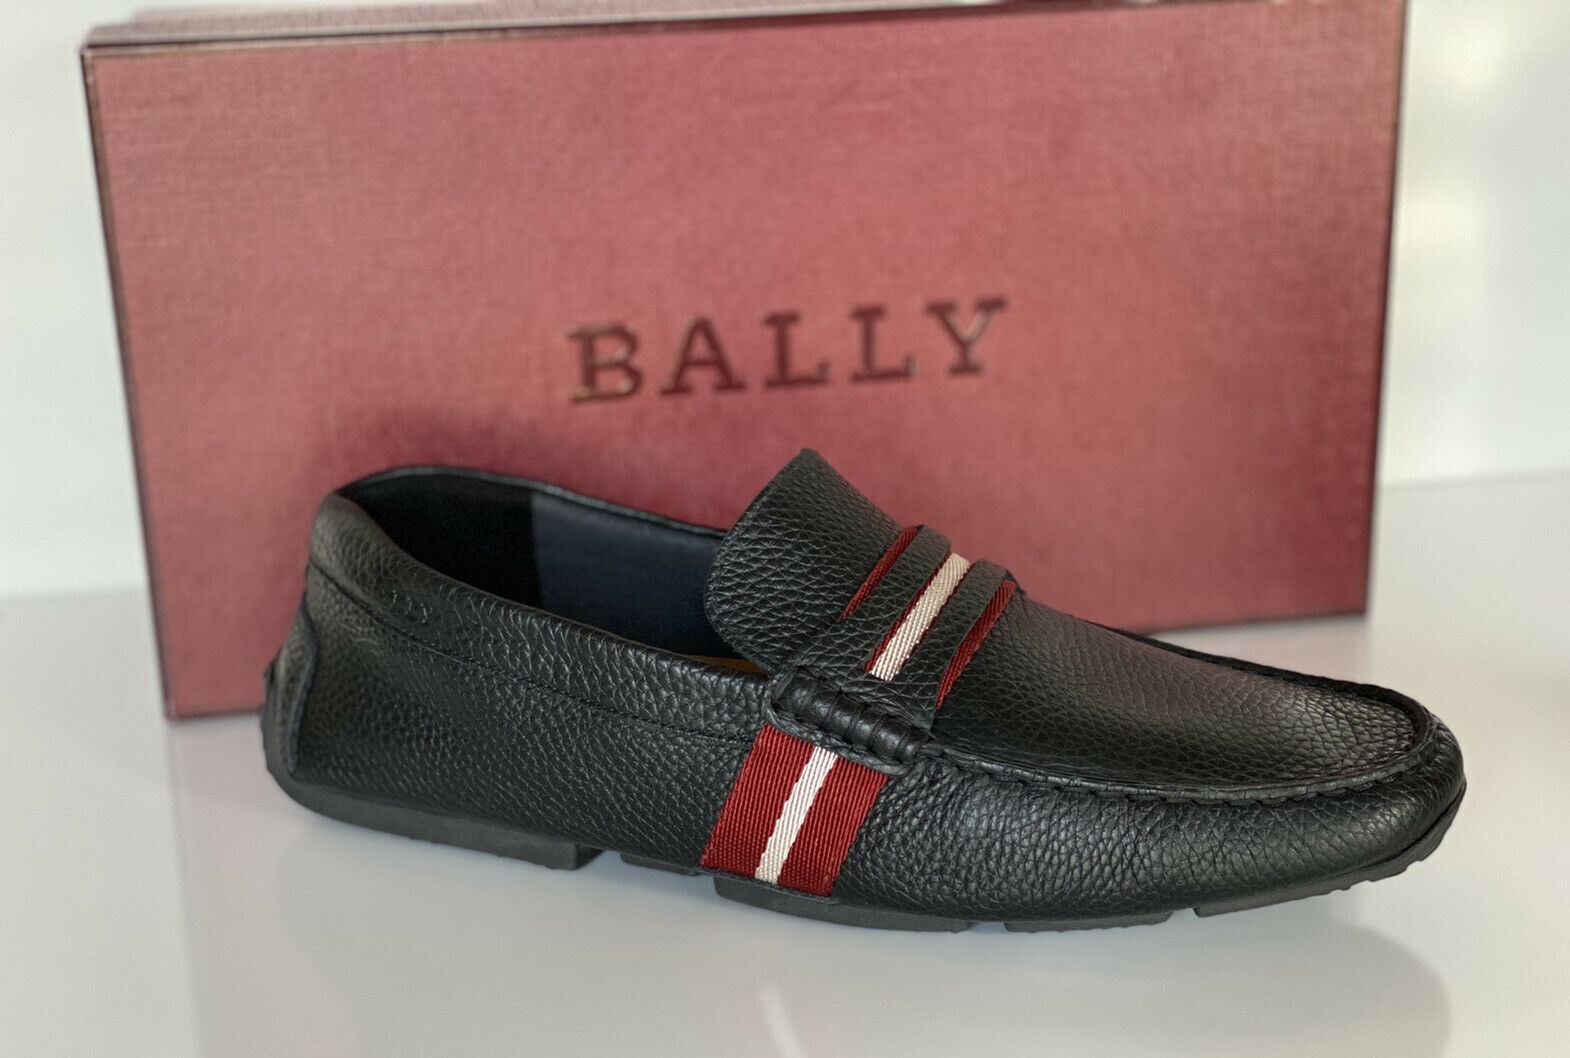 NIB Bally Mens Bovine Grained Leather Driver Shoes Black 11.5 D US 6228298 Italy